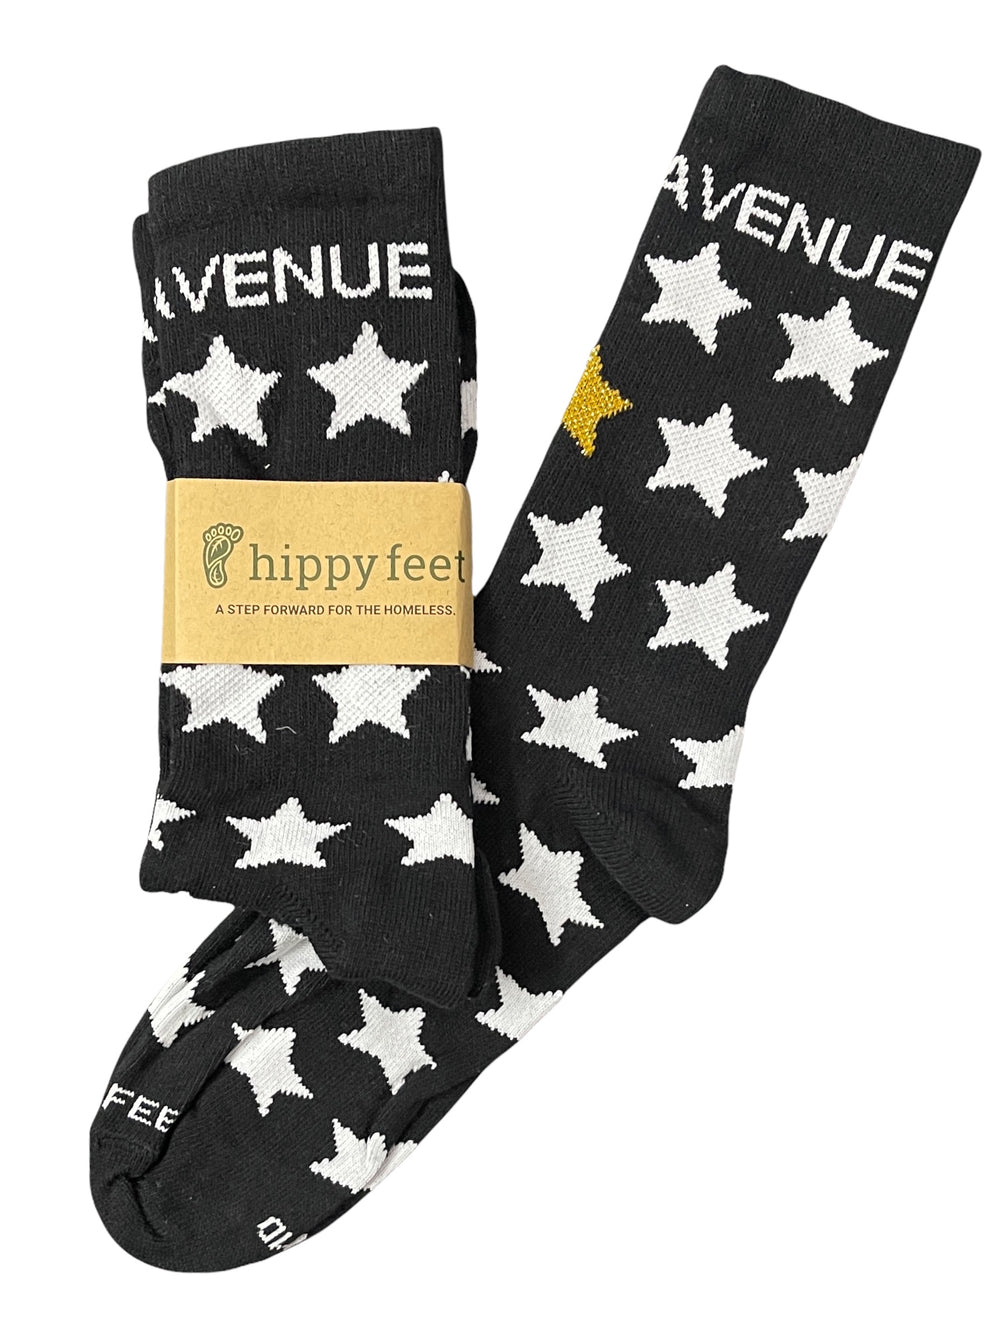 Prince – First Avenue Hippy Feet Official Unisex Socks Various Sizes NEW